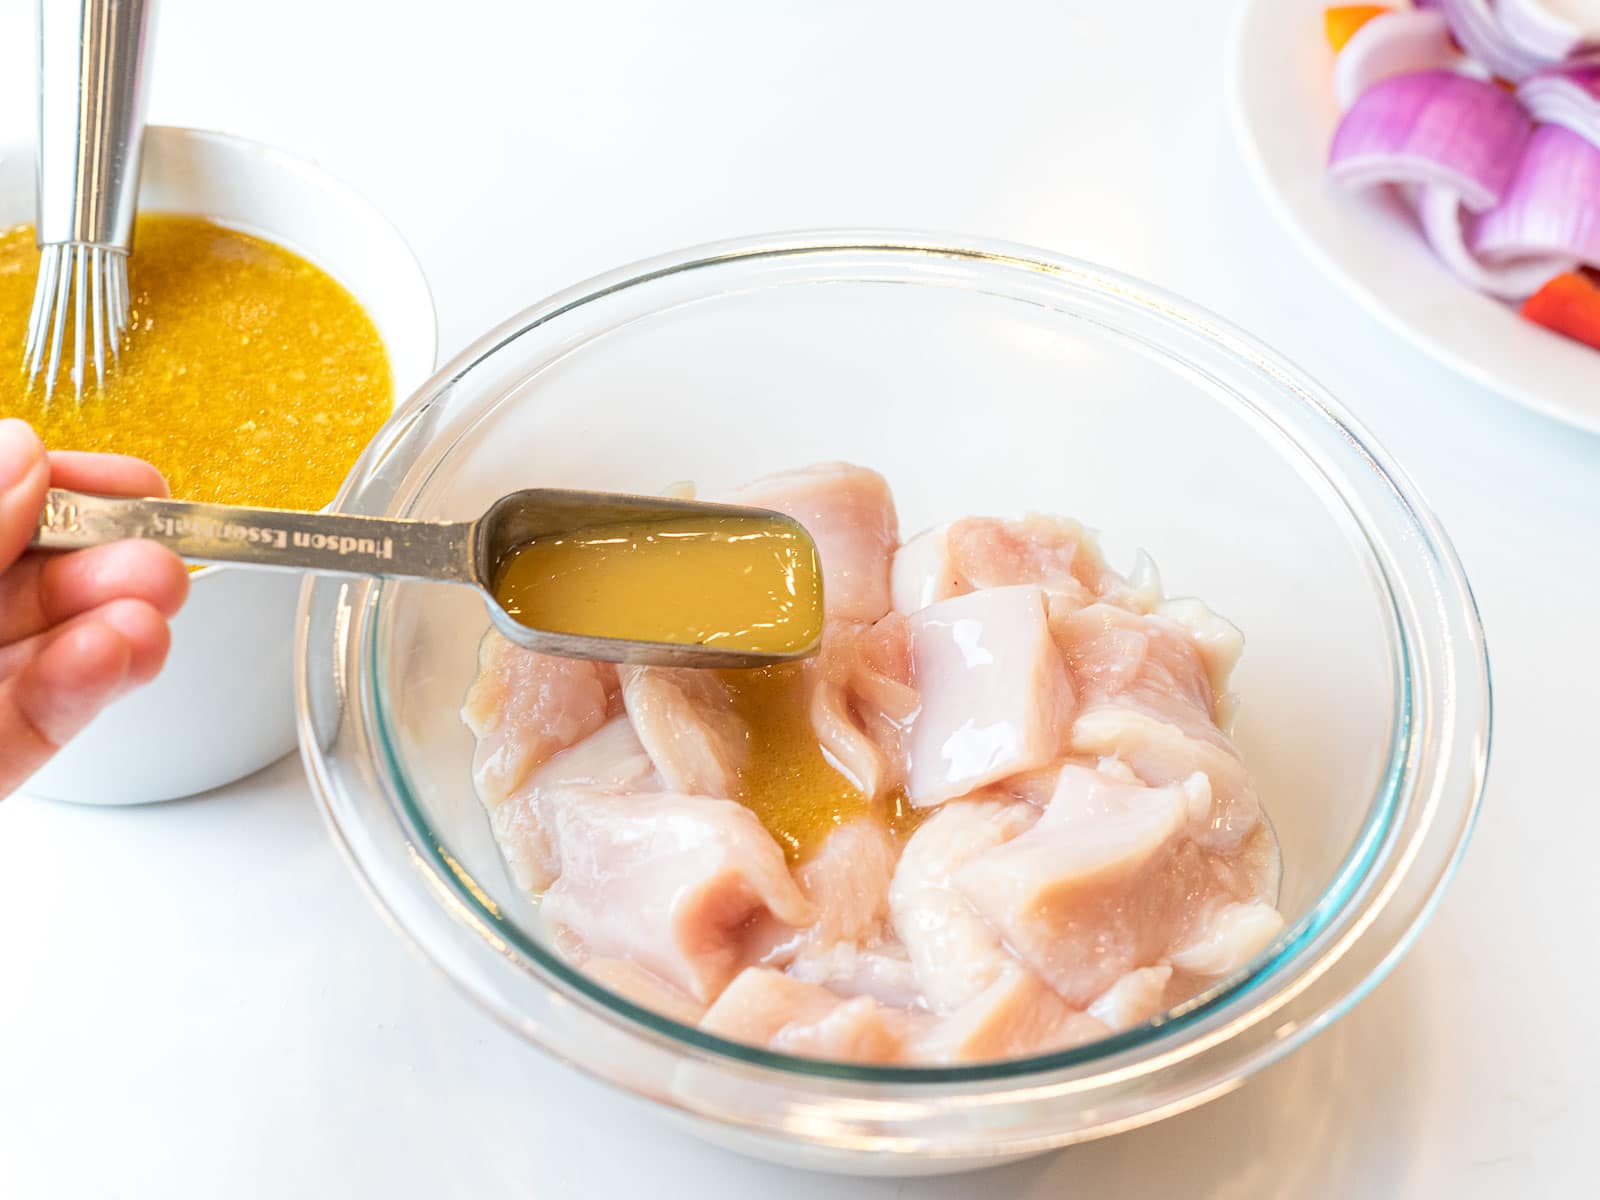 pineapple marinade being added to chicken breast